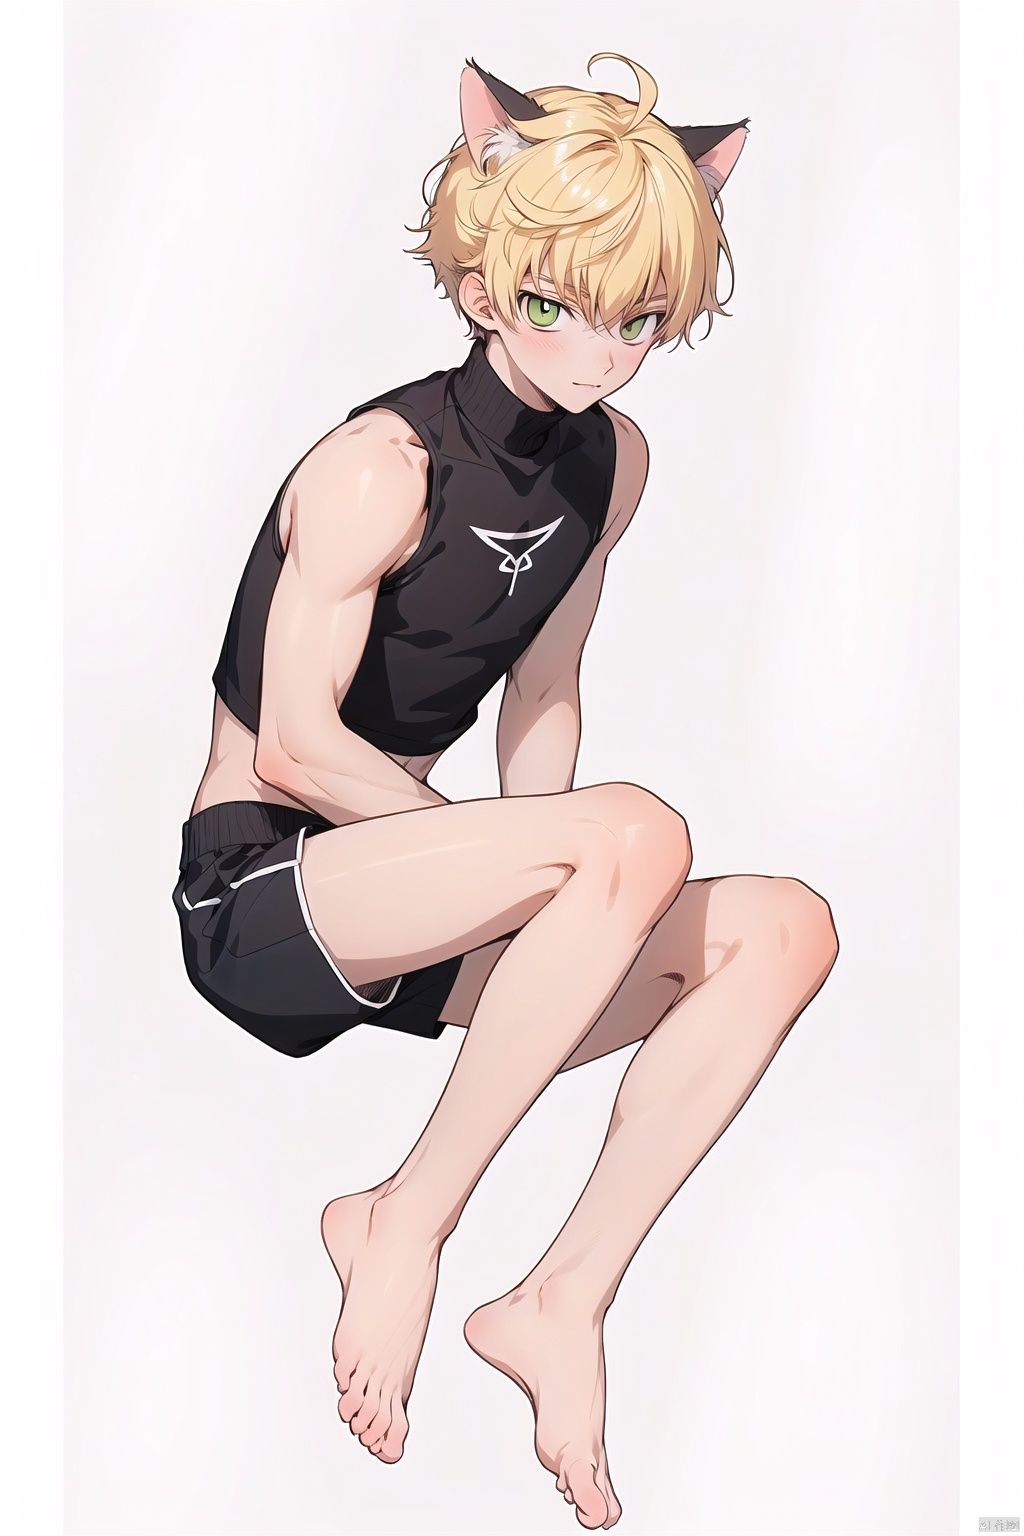  1boy,16 year old,yellow_hair,sleeveless turtleneck crop top,cat ears, bare legs,bare_feet,young_human,happiness!,code_geass,home, 1male,slim,simple background,